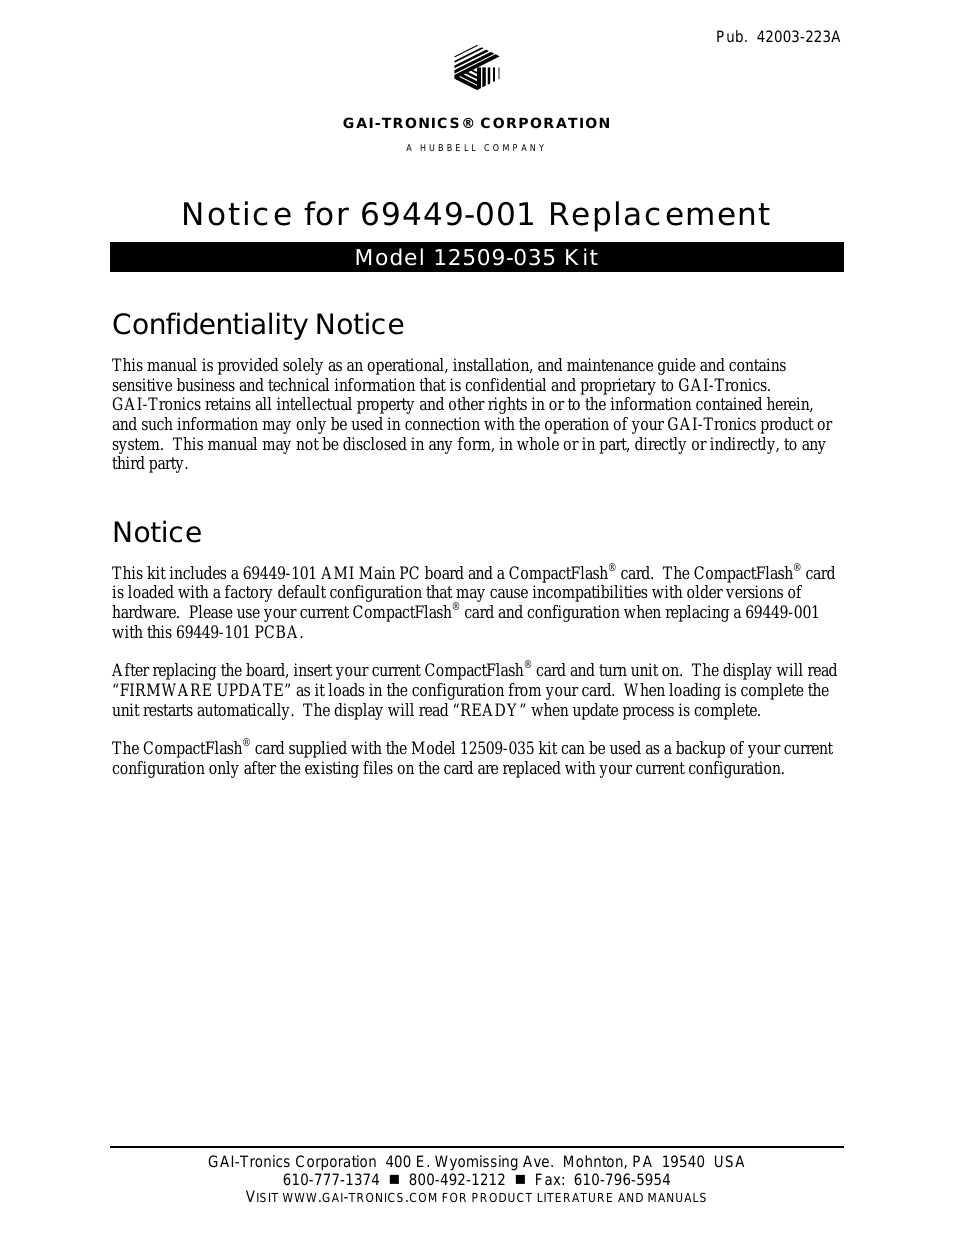 12509-035 Notice for 69449-001